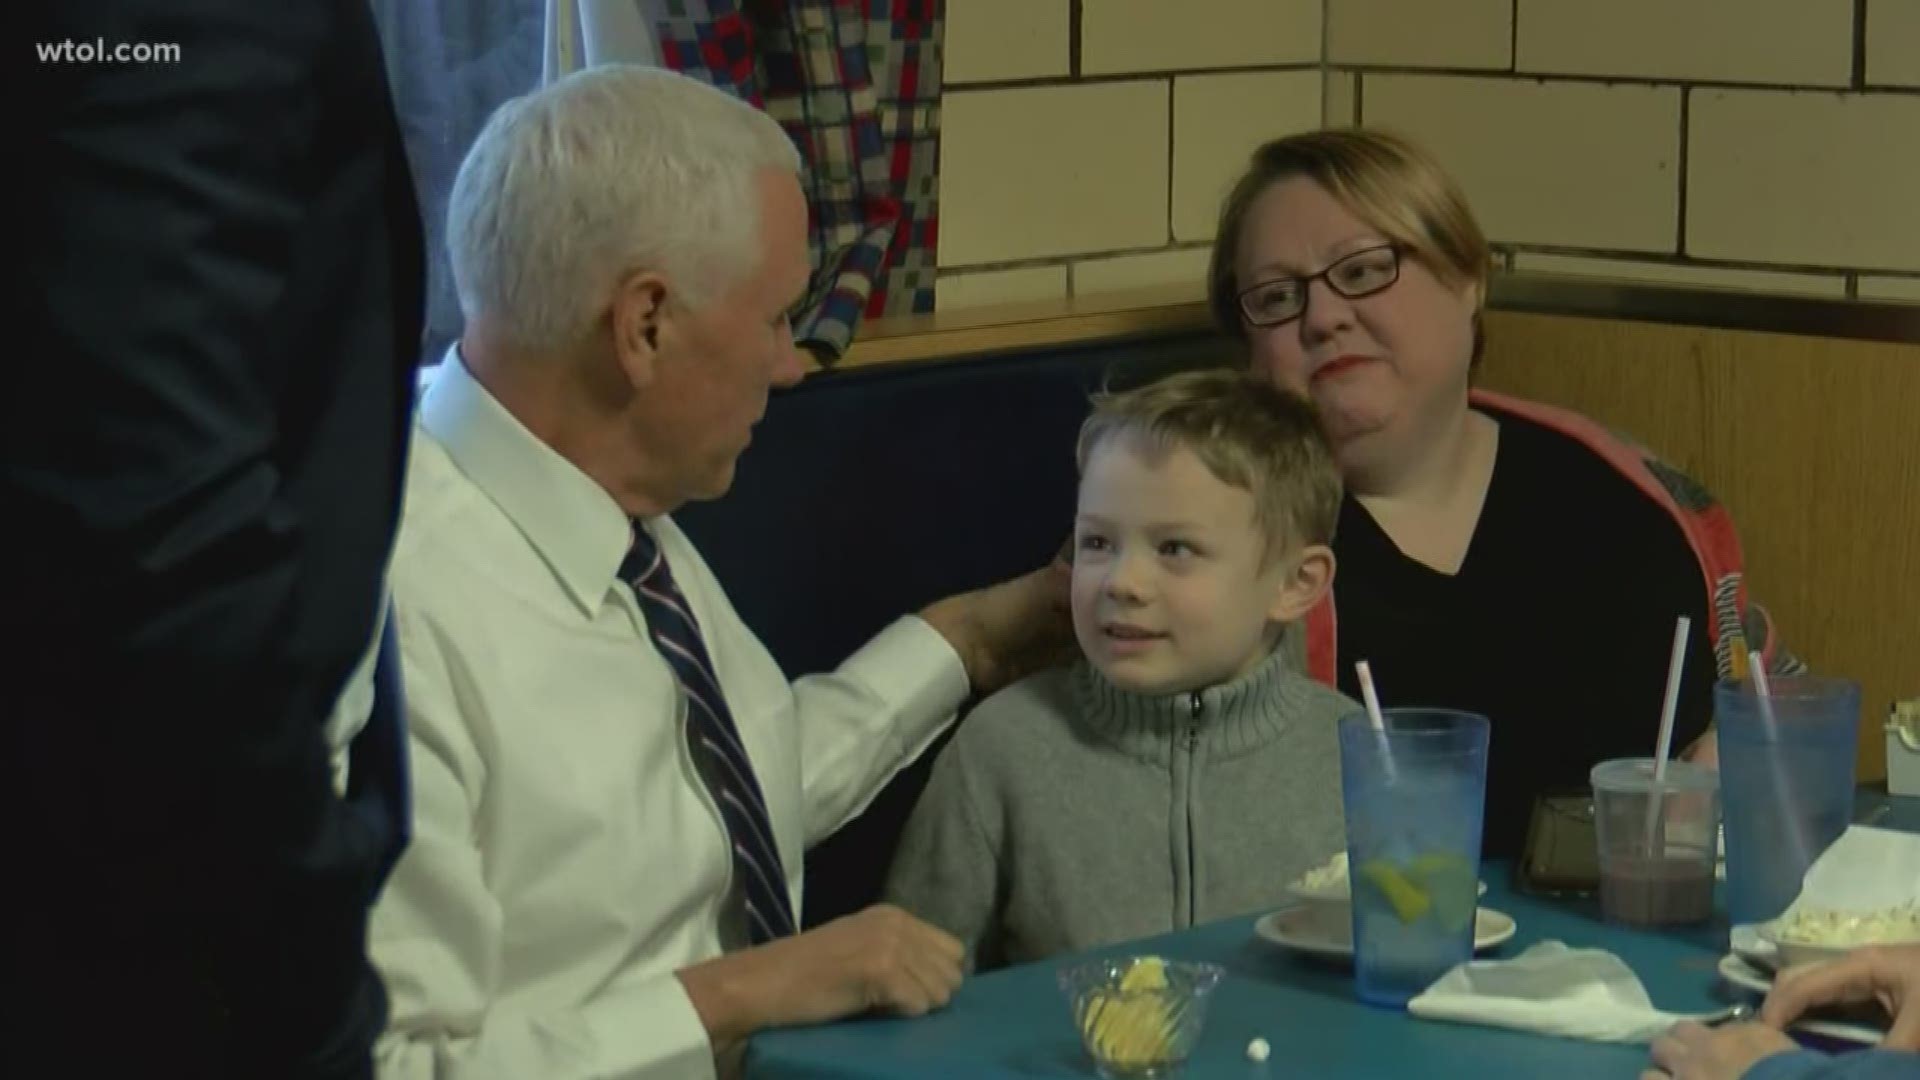 The Vice President made an unannounced stop at Schmucker's Restaurant in west Toledo to greet customers.